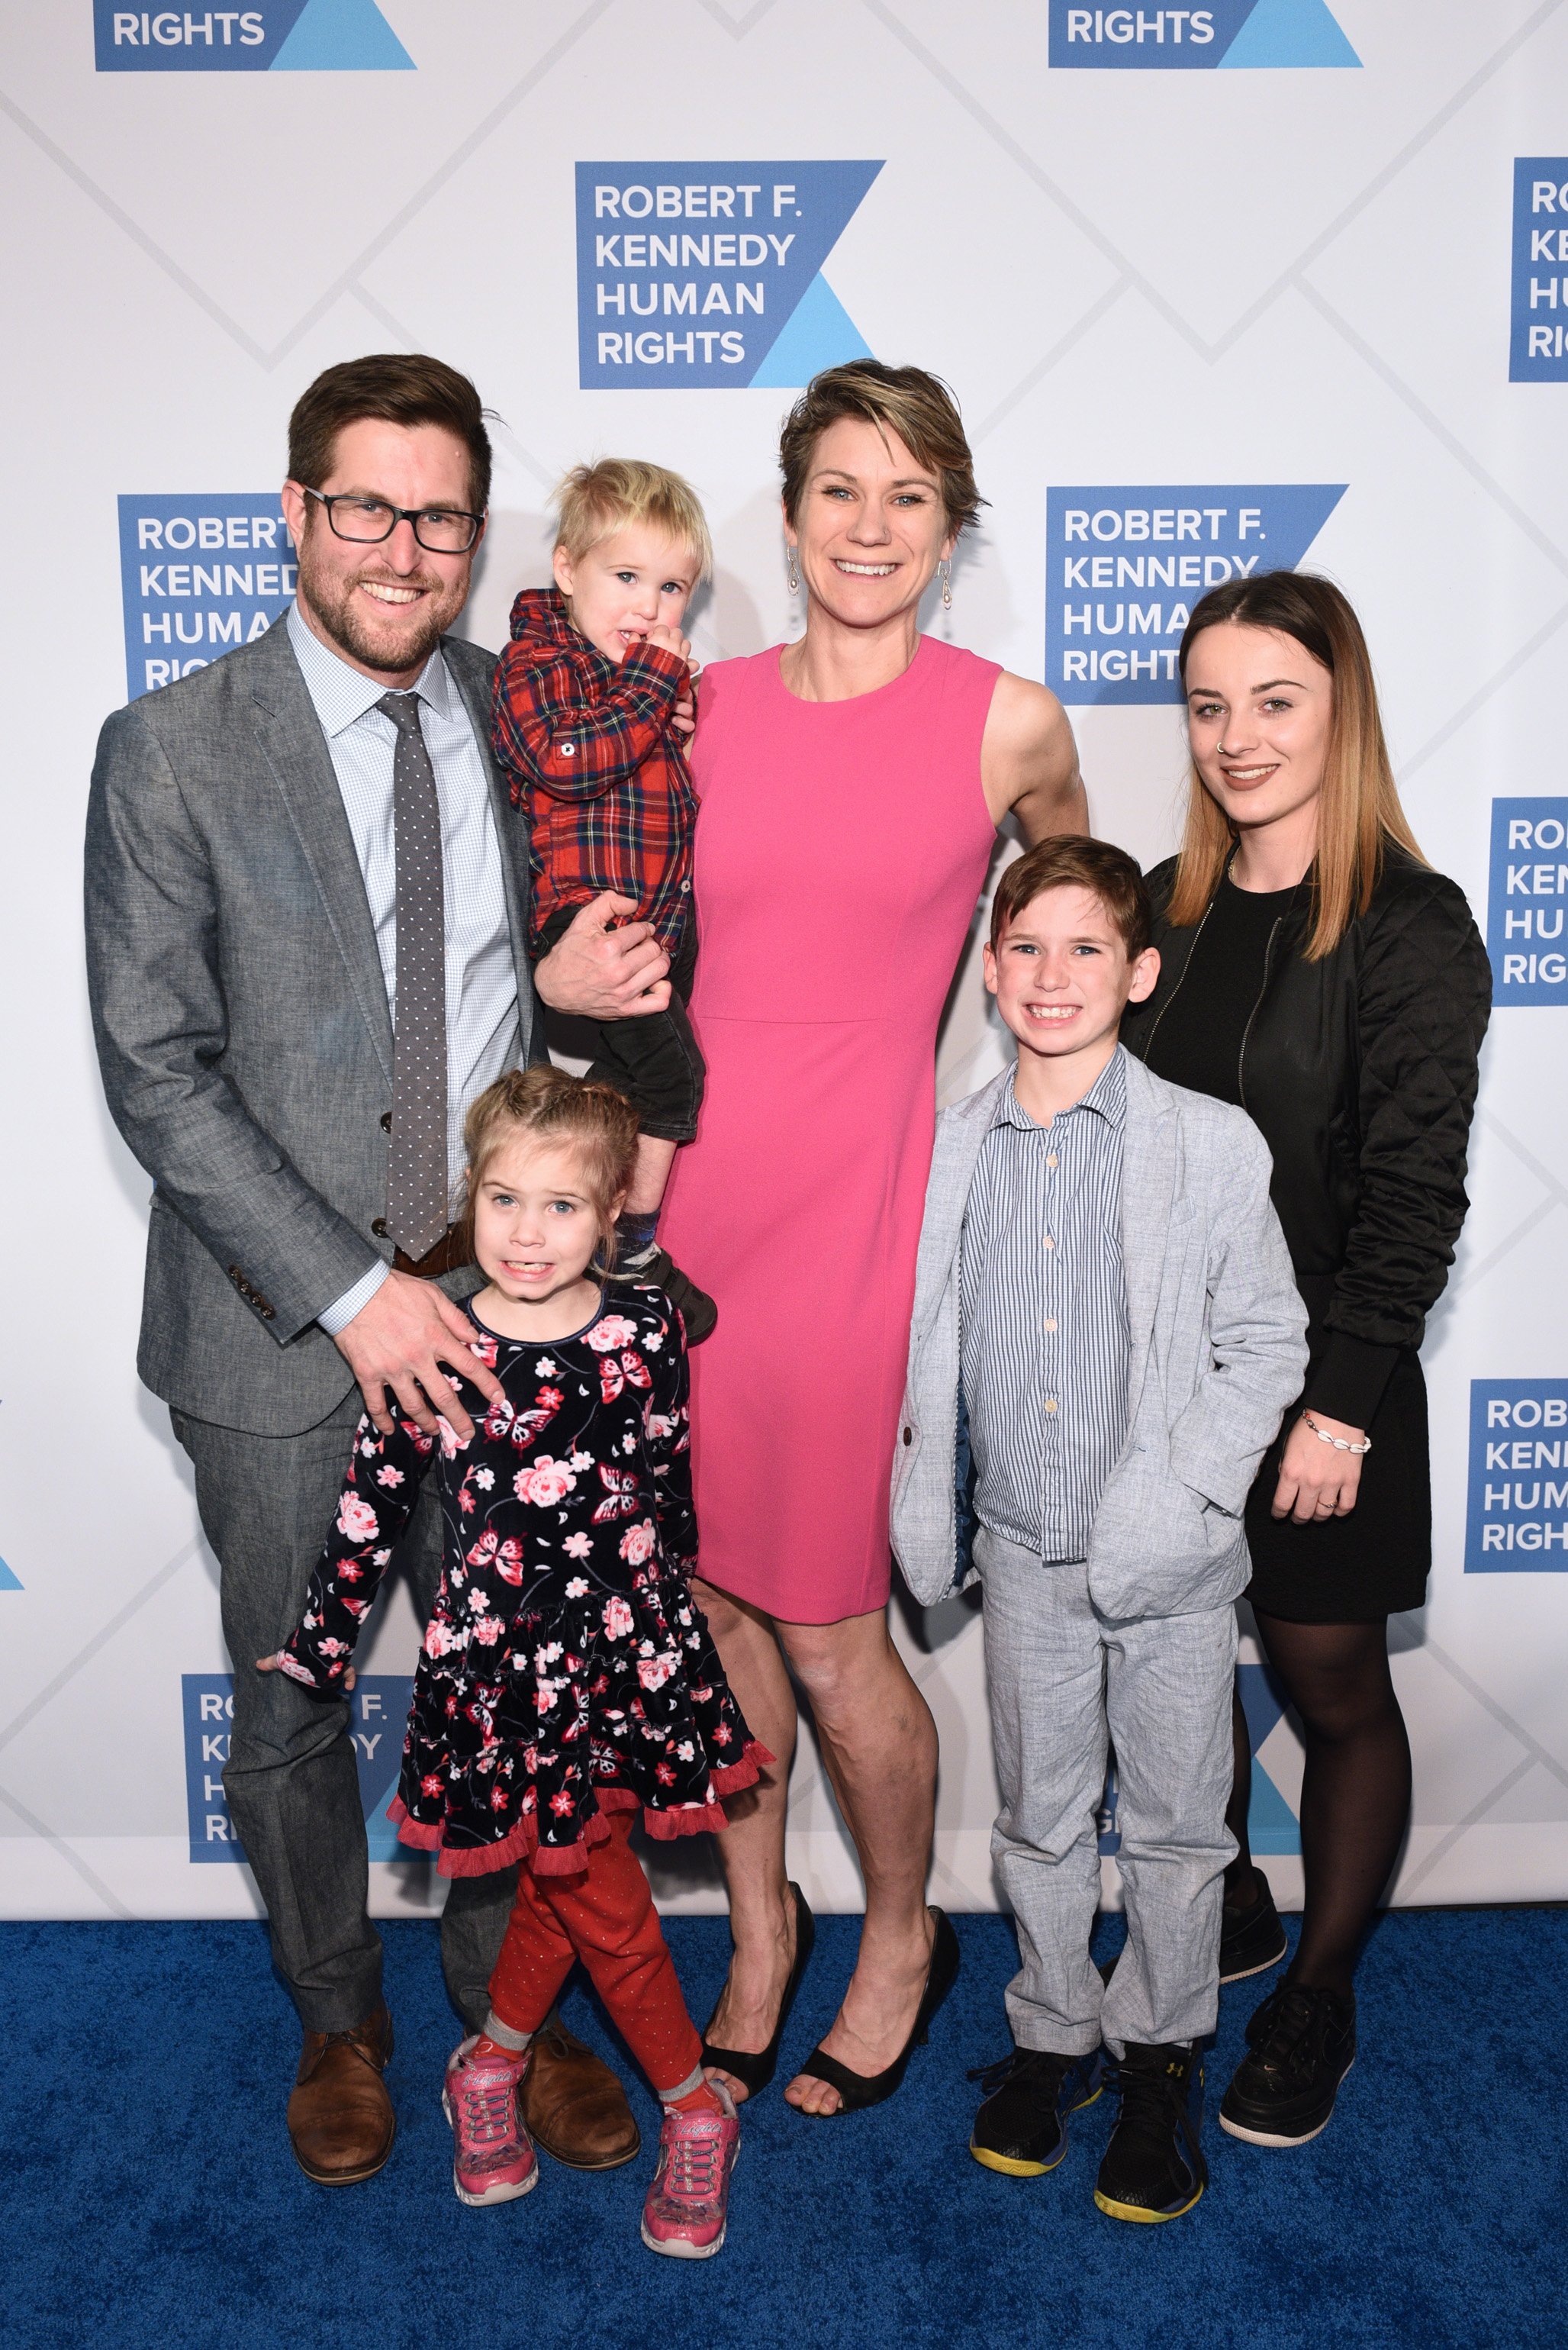 David McKean, Maeve Kennedy Townsend Mckean and family attend the Robert F. Kennedy Human Rights Hosts 2019 Ripple Of Hope Gala & Auction In NYC on December 12, 2019, in New York City. | Source: Getty Images.